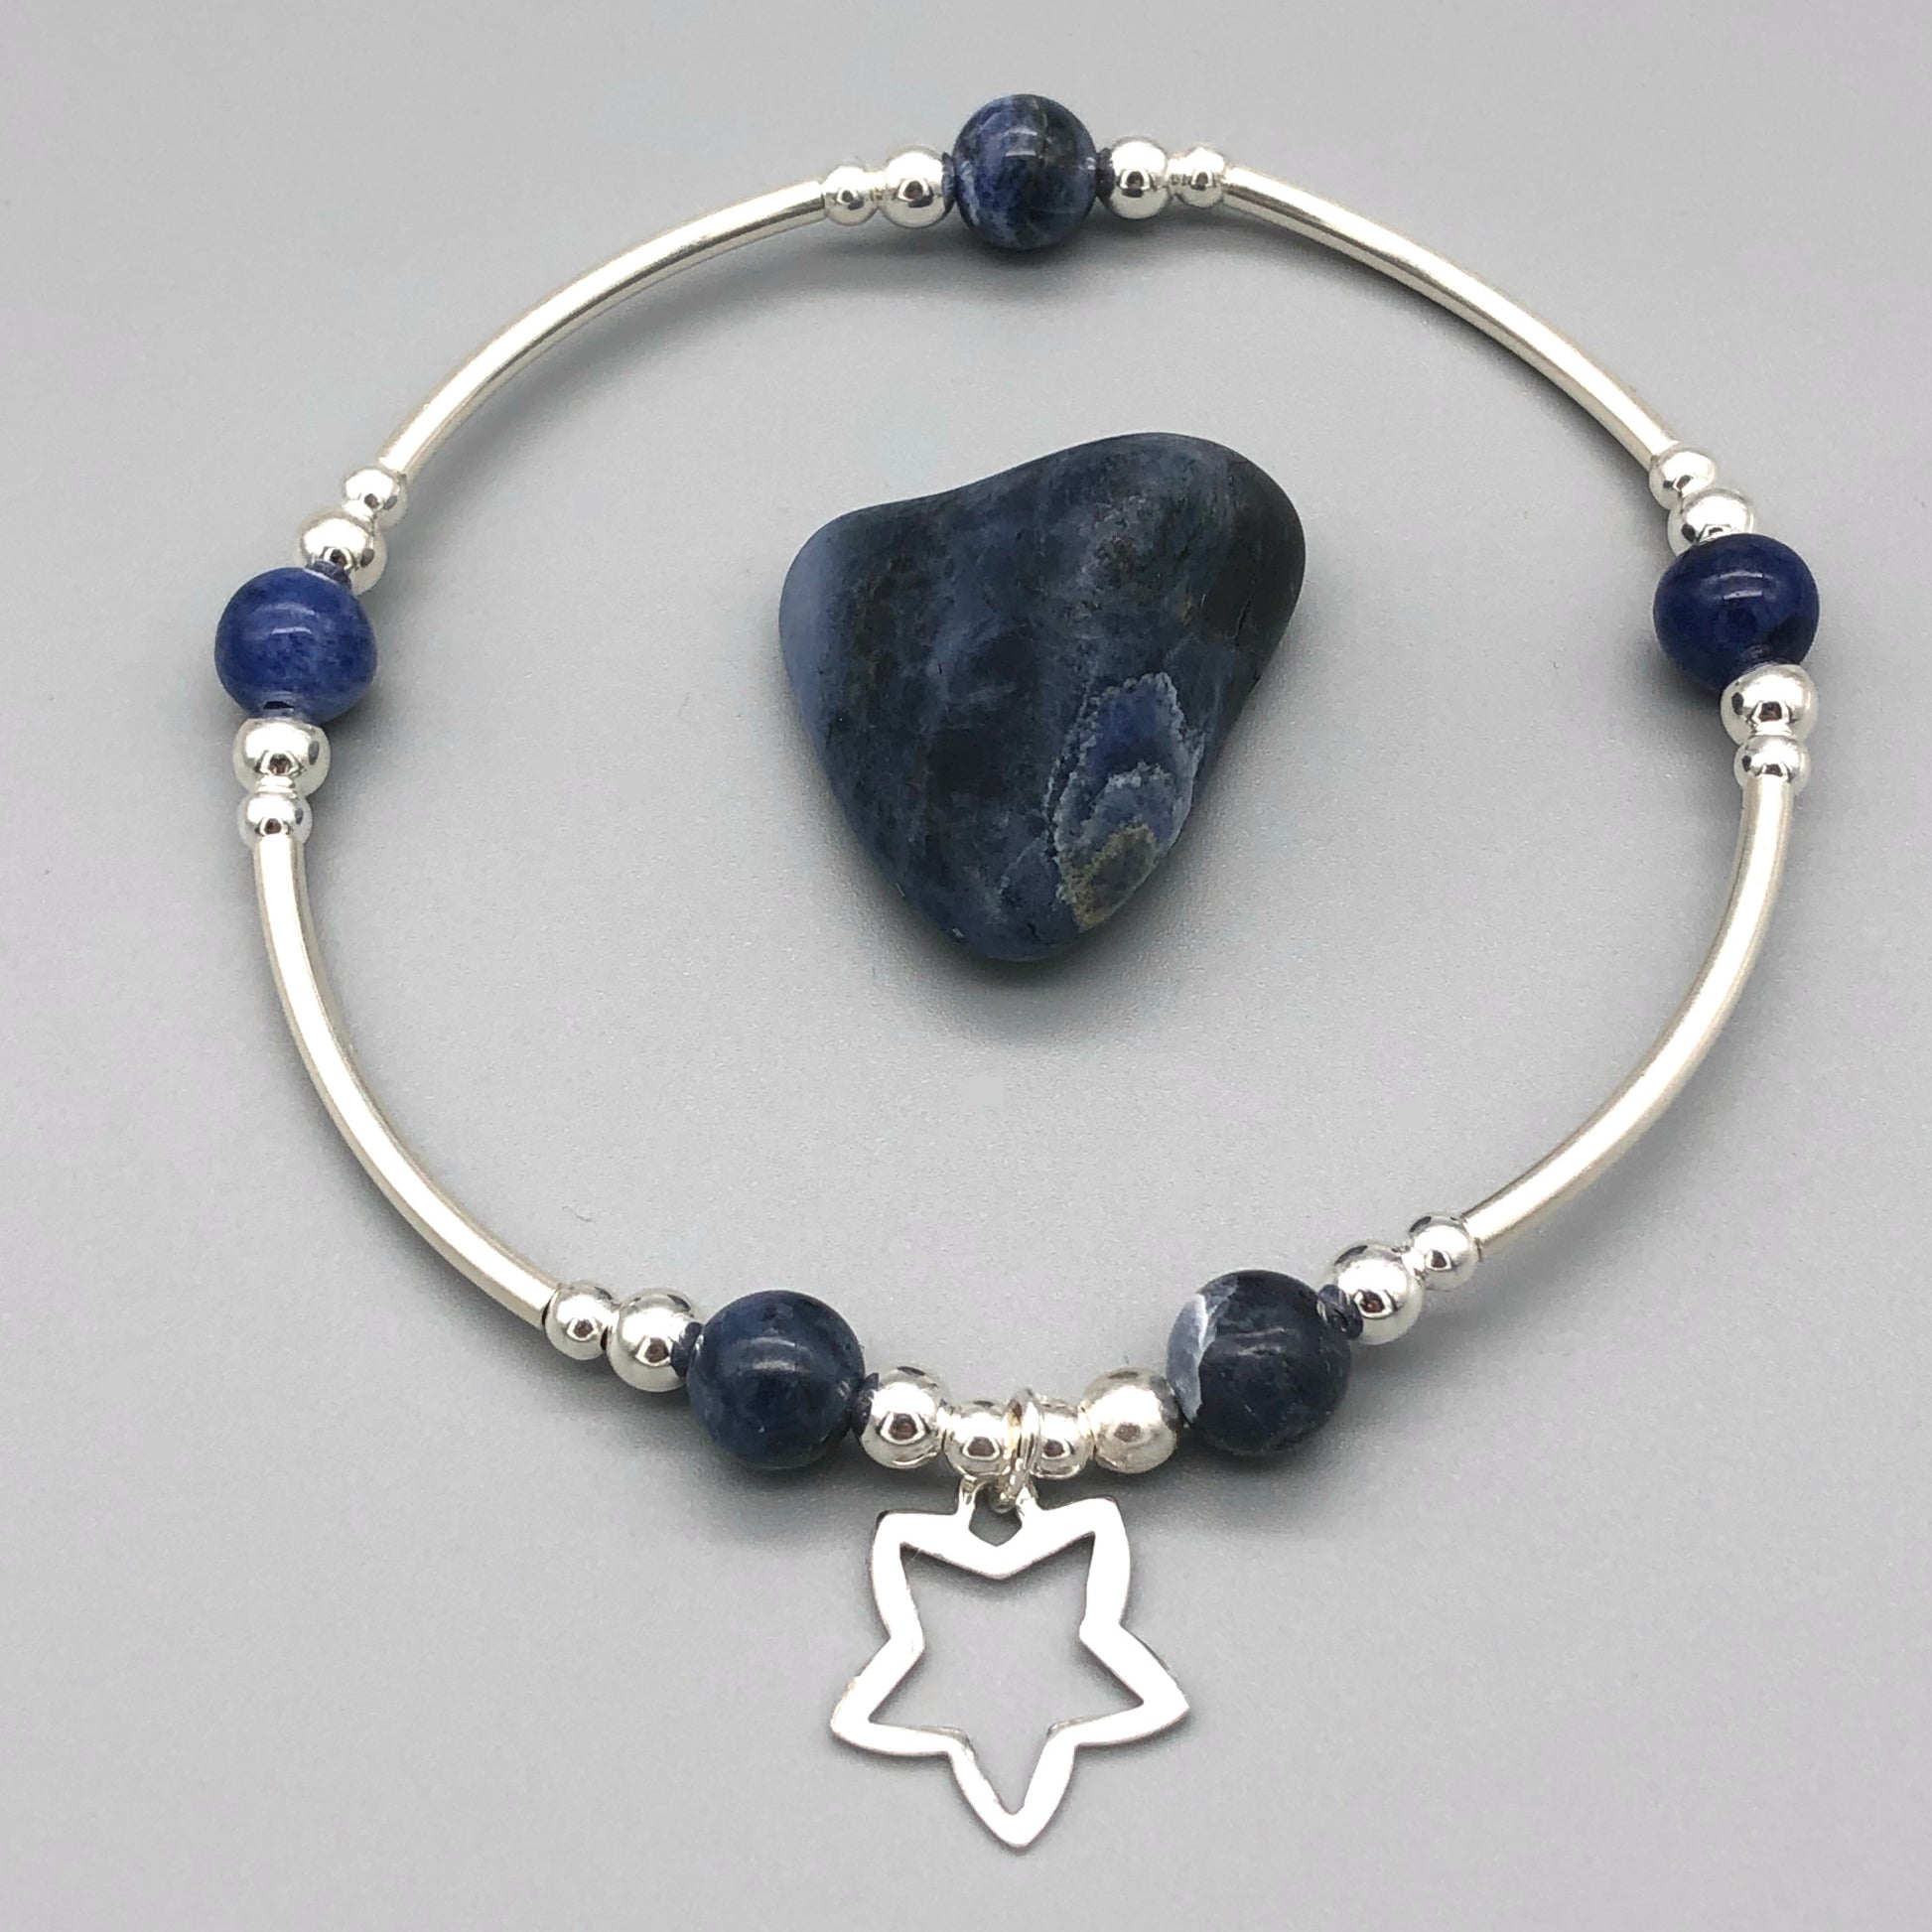 Star charm sodalite healing stone &  sterling silver beads women's stacking bracelet by My Silver Wish